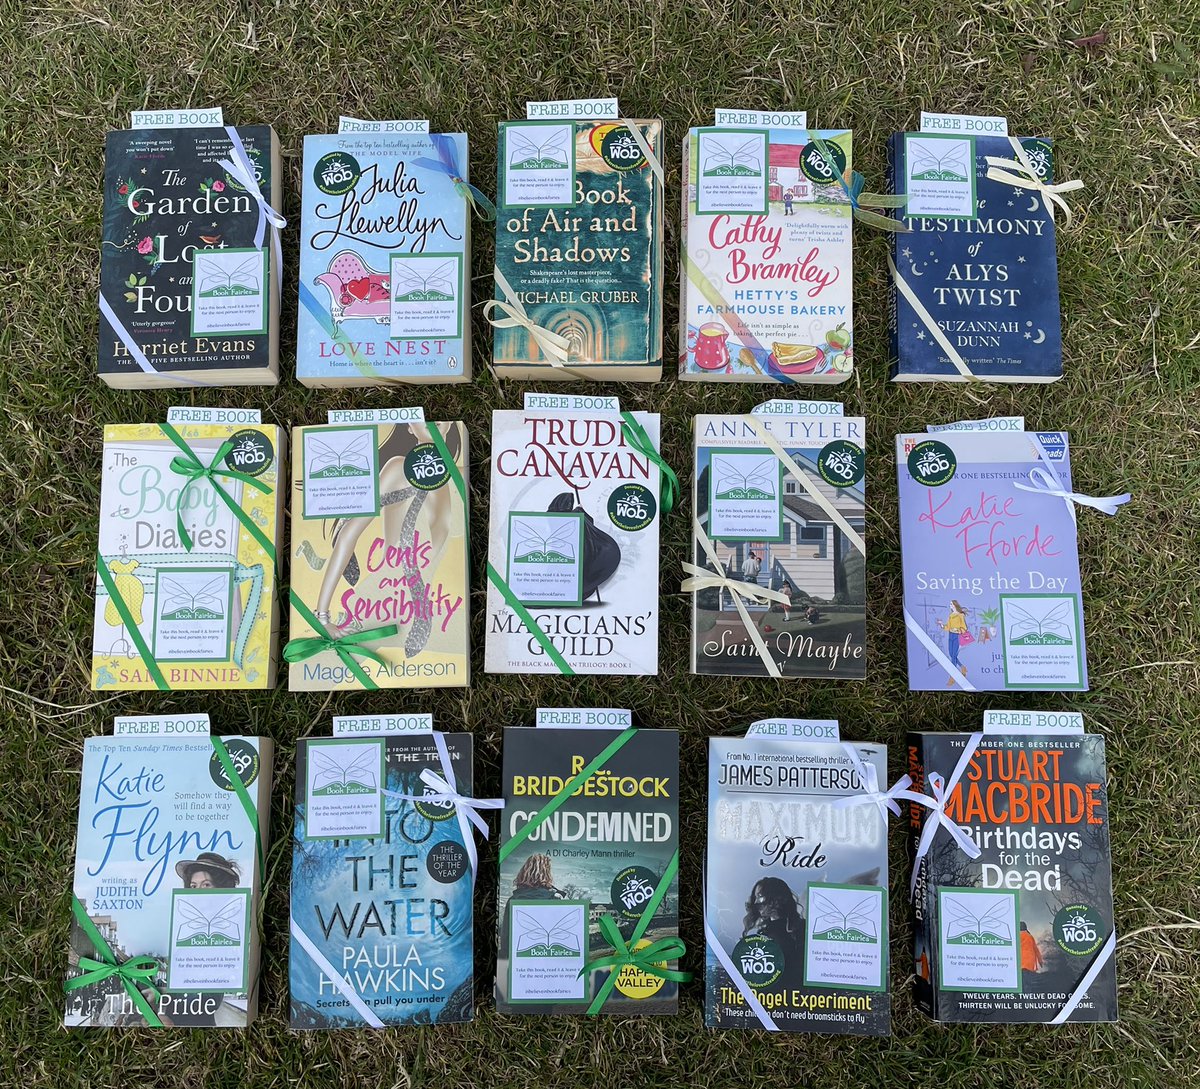 Today @the_bookfairies are celebrating the end of #greenbookfairies month with #secondhandbookfairies
Will you find one of these pre-loved books in #Edinburgh?
Thanks to @Wob_group for donating them

@BookfairiesEdin 
@BookfairiesScot #ibelieveinbookfairies #sharetheloveofreading